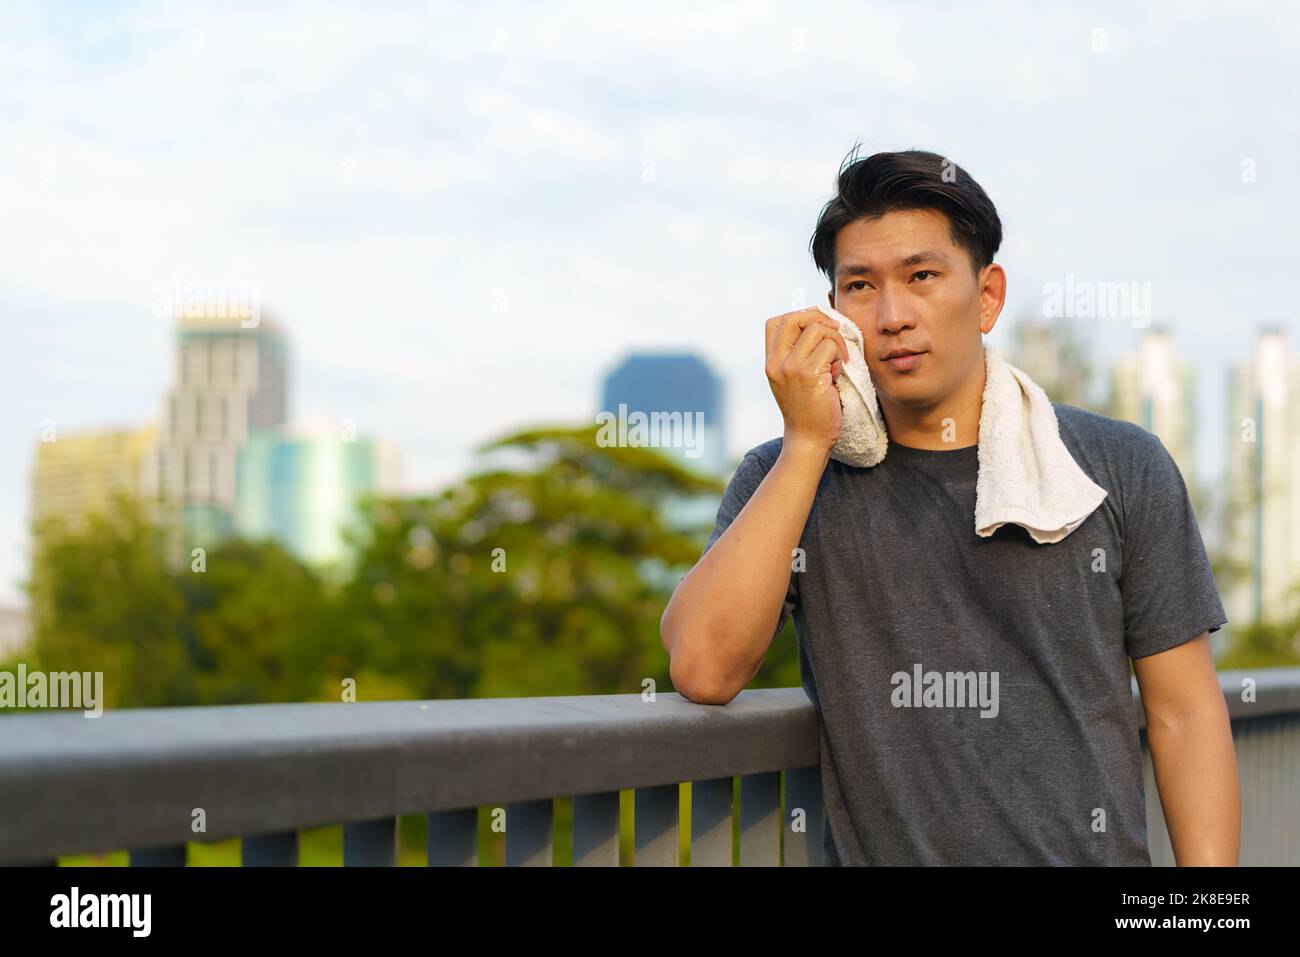 Portrait of Asian young man wearing sportswear, standing and wiping sweat with towel outdoor on walkway with city building background. Stock Photo